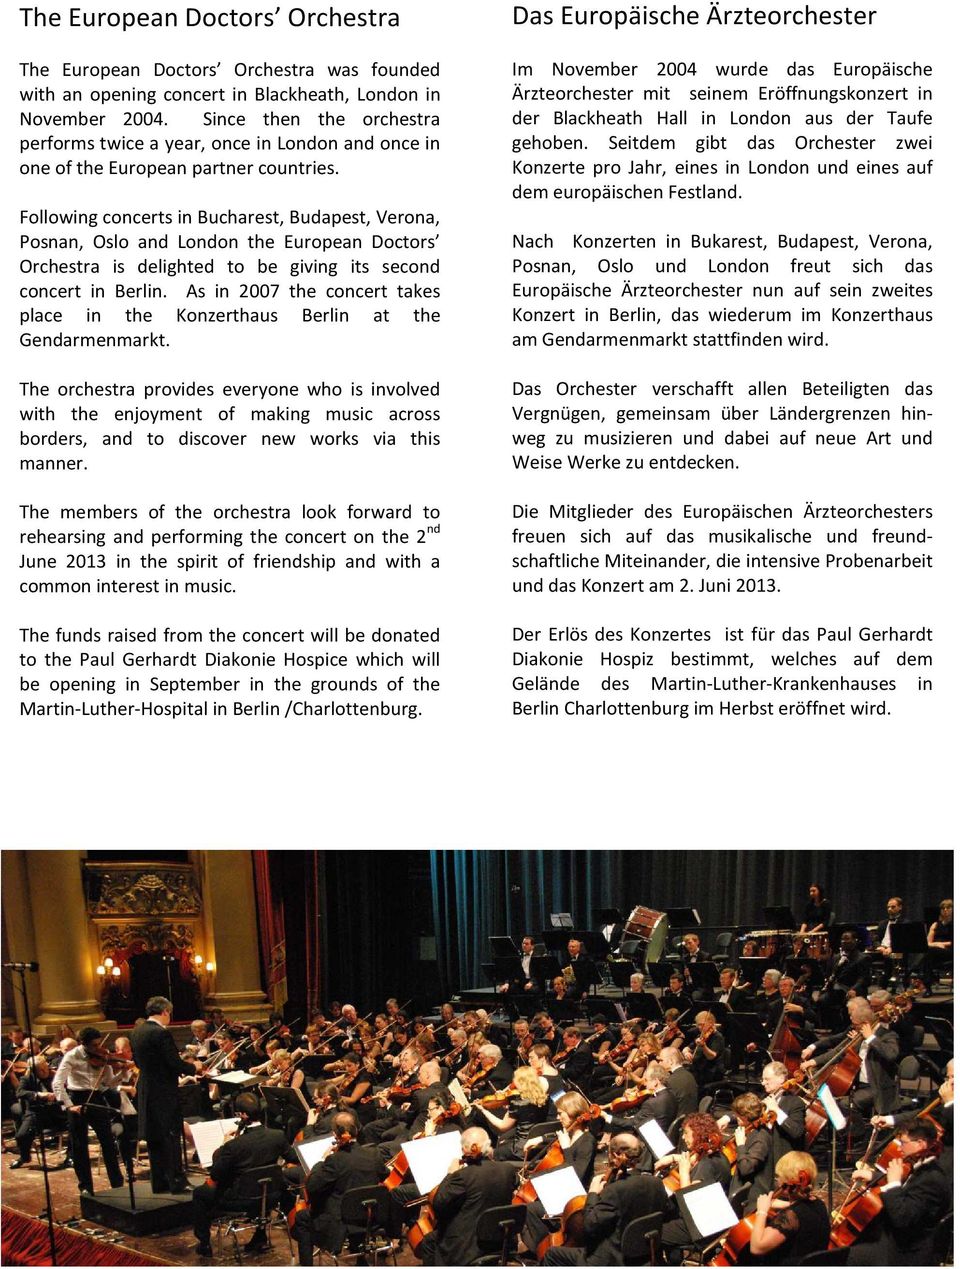 Following concerts in Bucharest, Budapest, Verona, Posnan, Oslo and London the European Doctors Orchestra is delighted to be giving its second concert in Berlin.